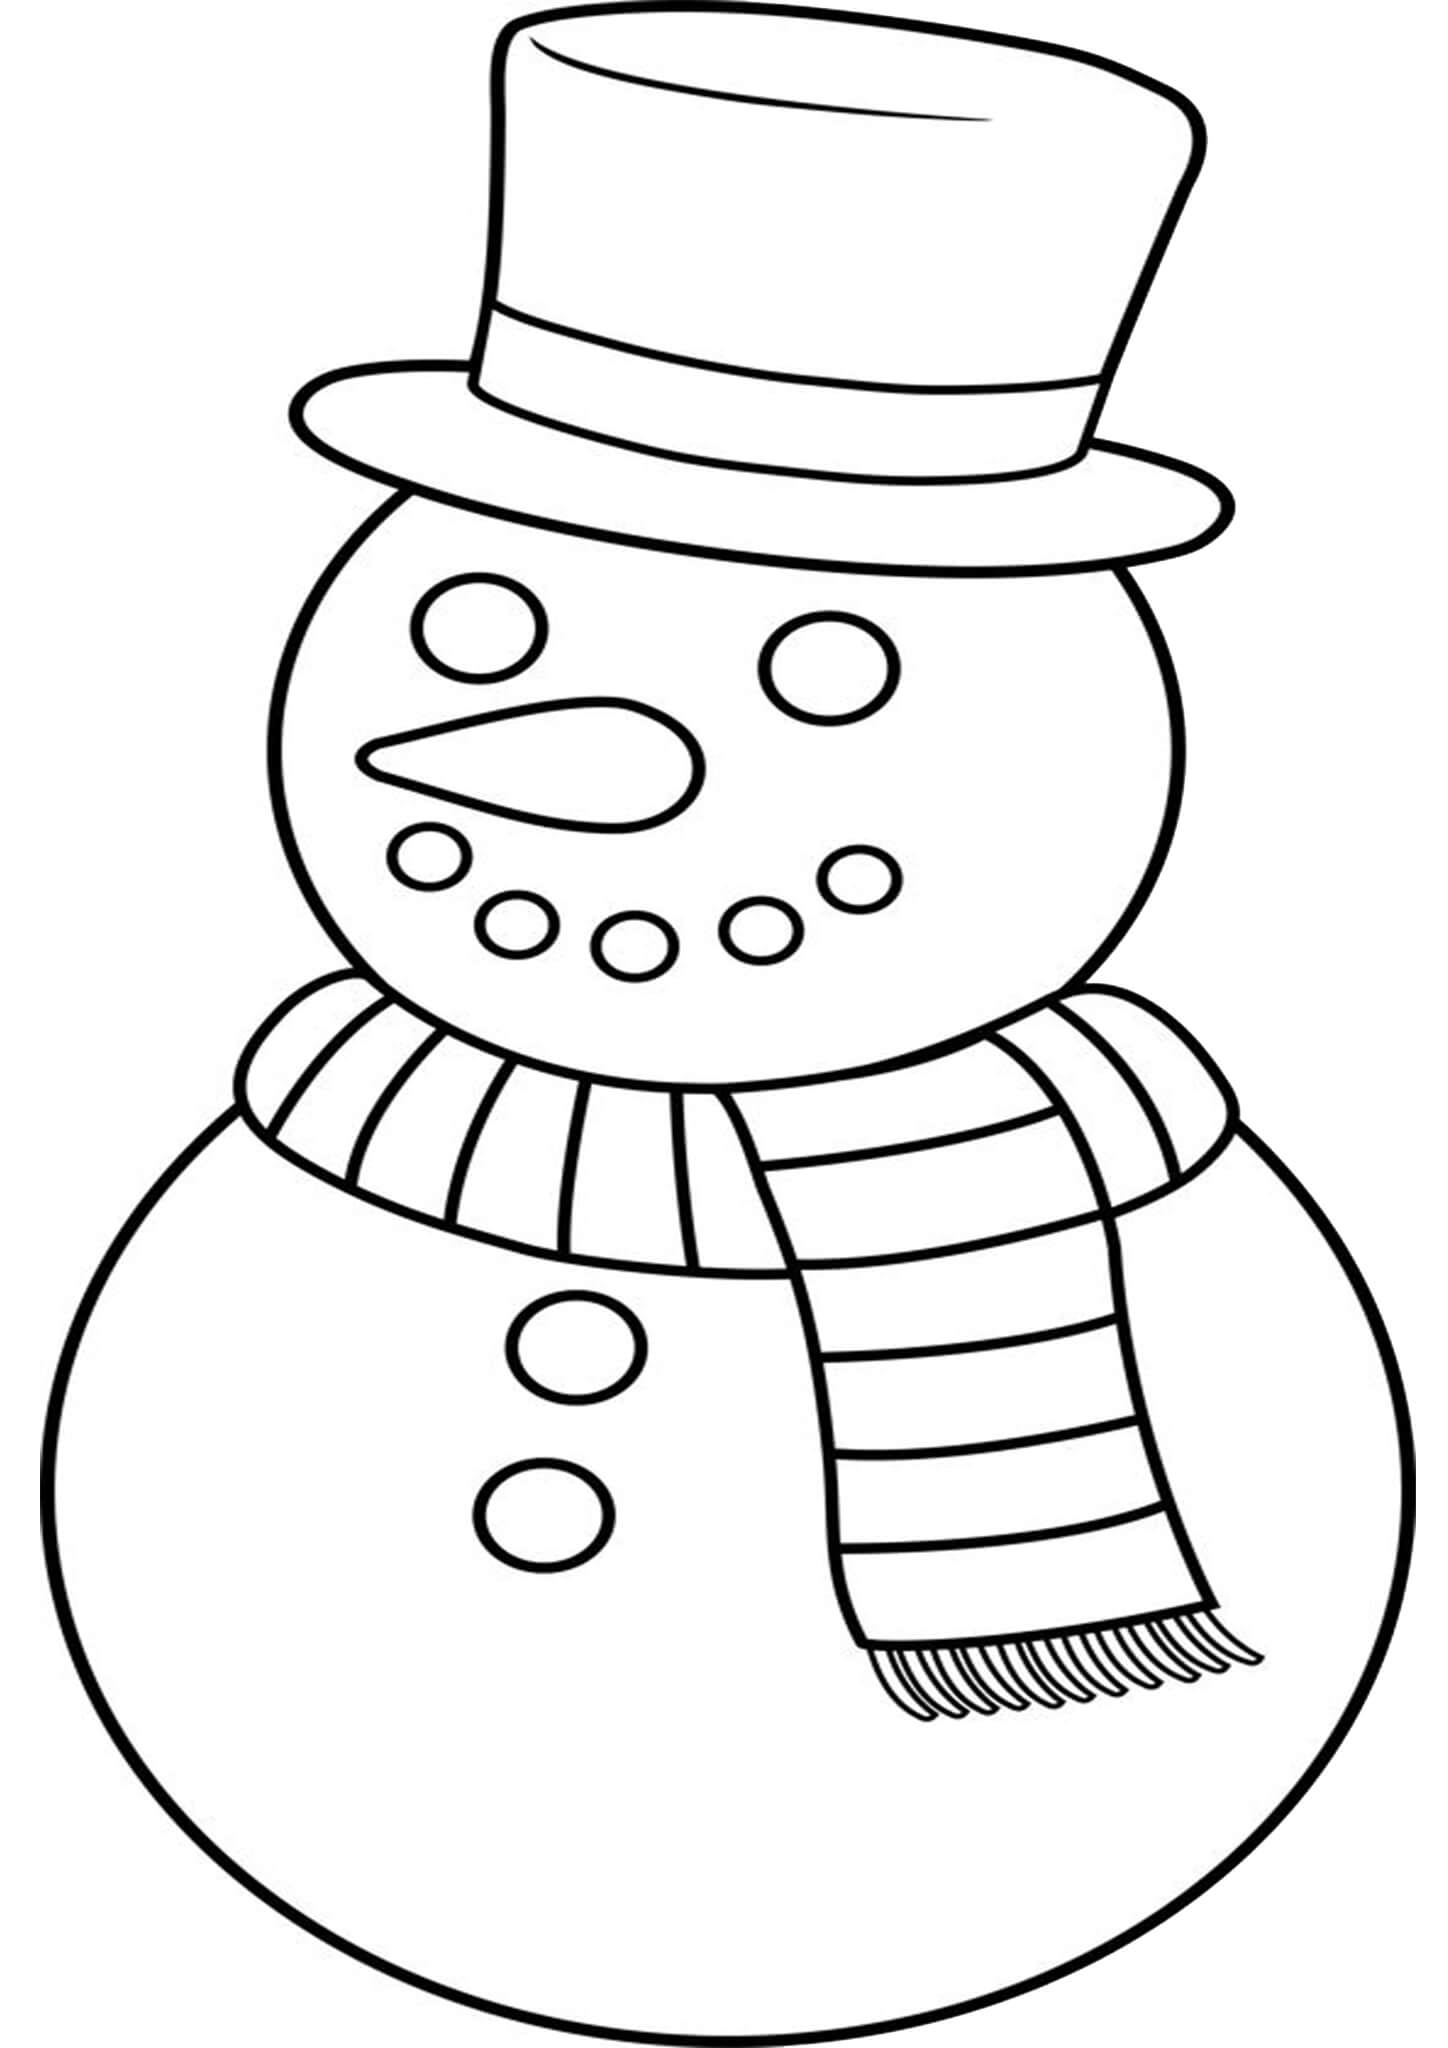 Free Printable Snowman Coloring Pages For Kids Snowman Coloring Pages 